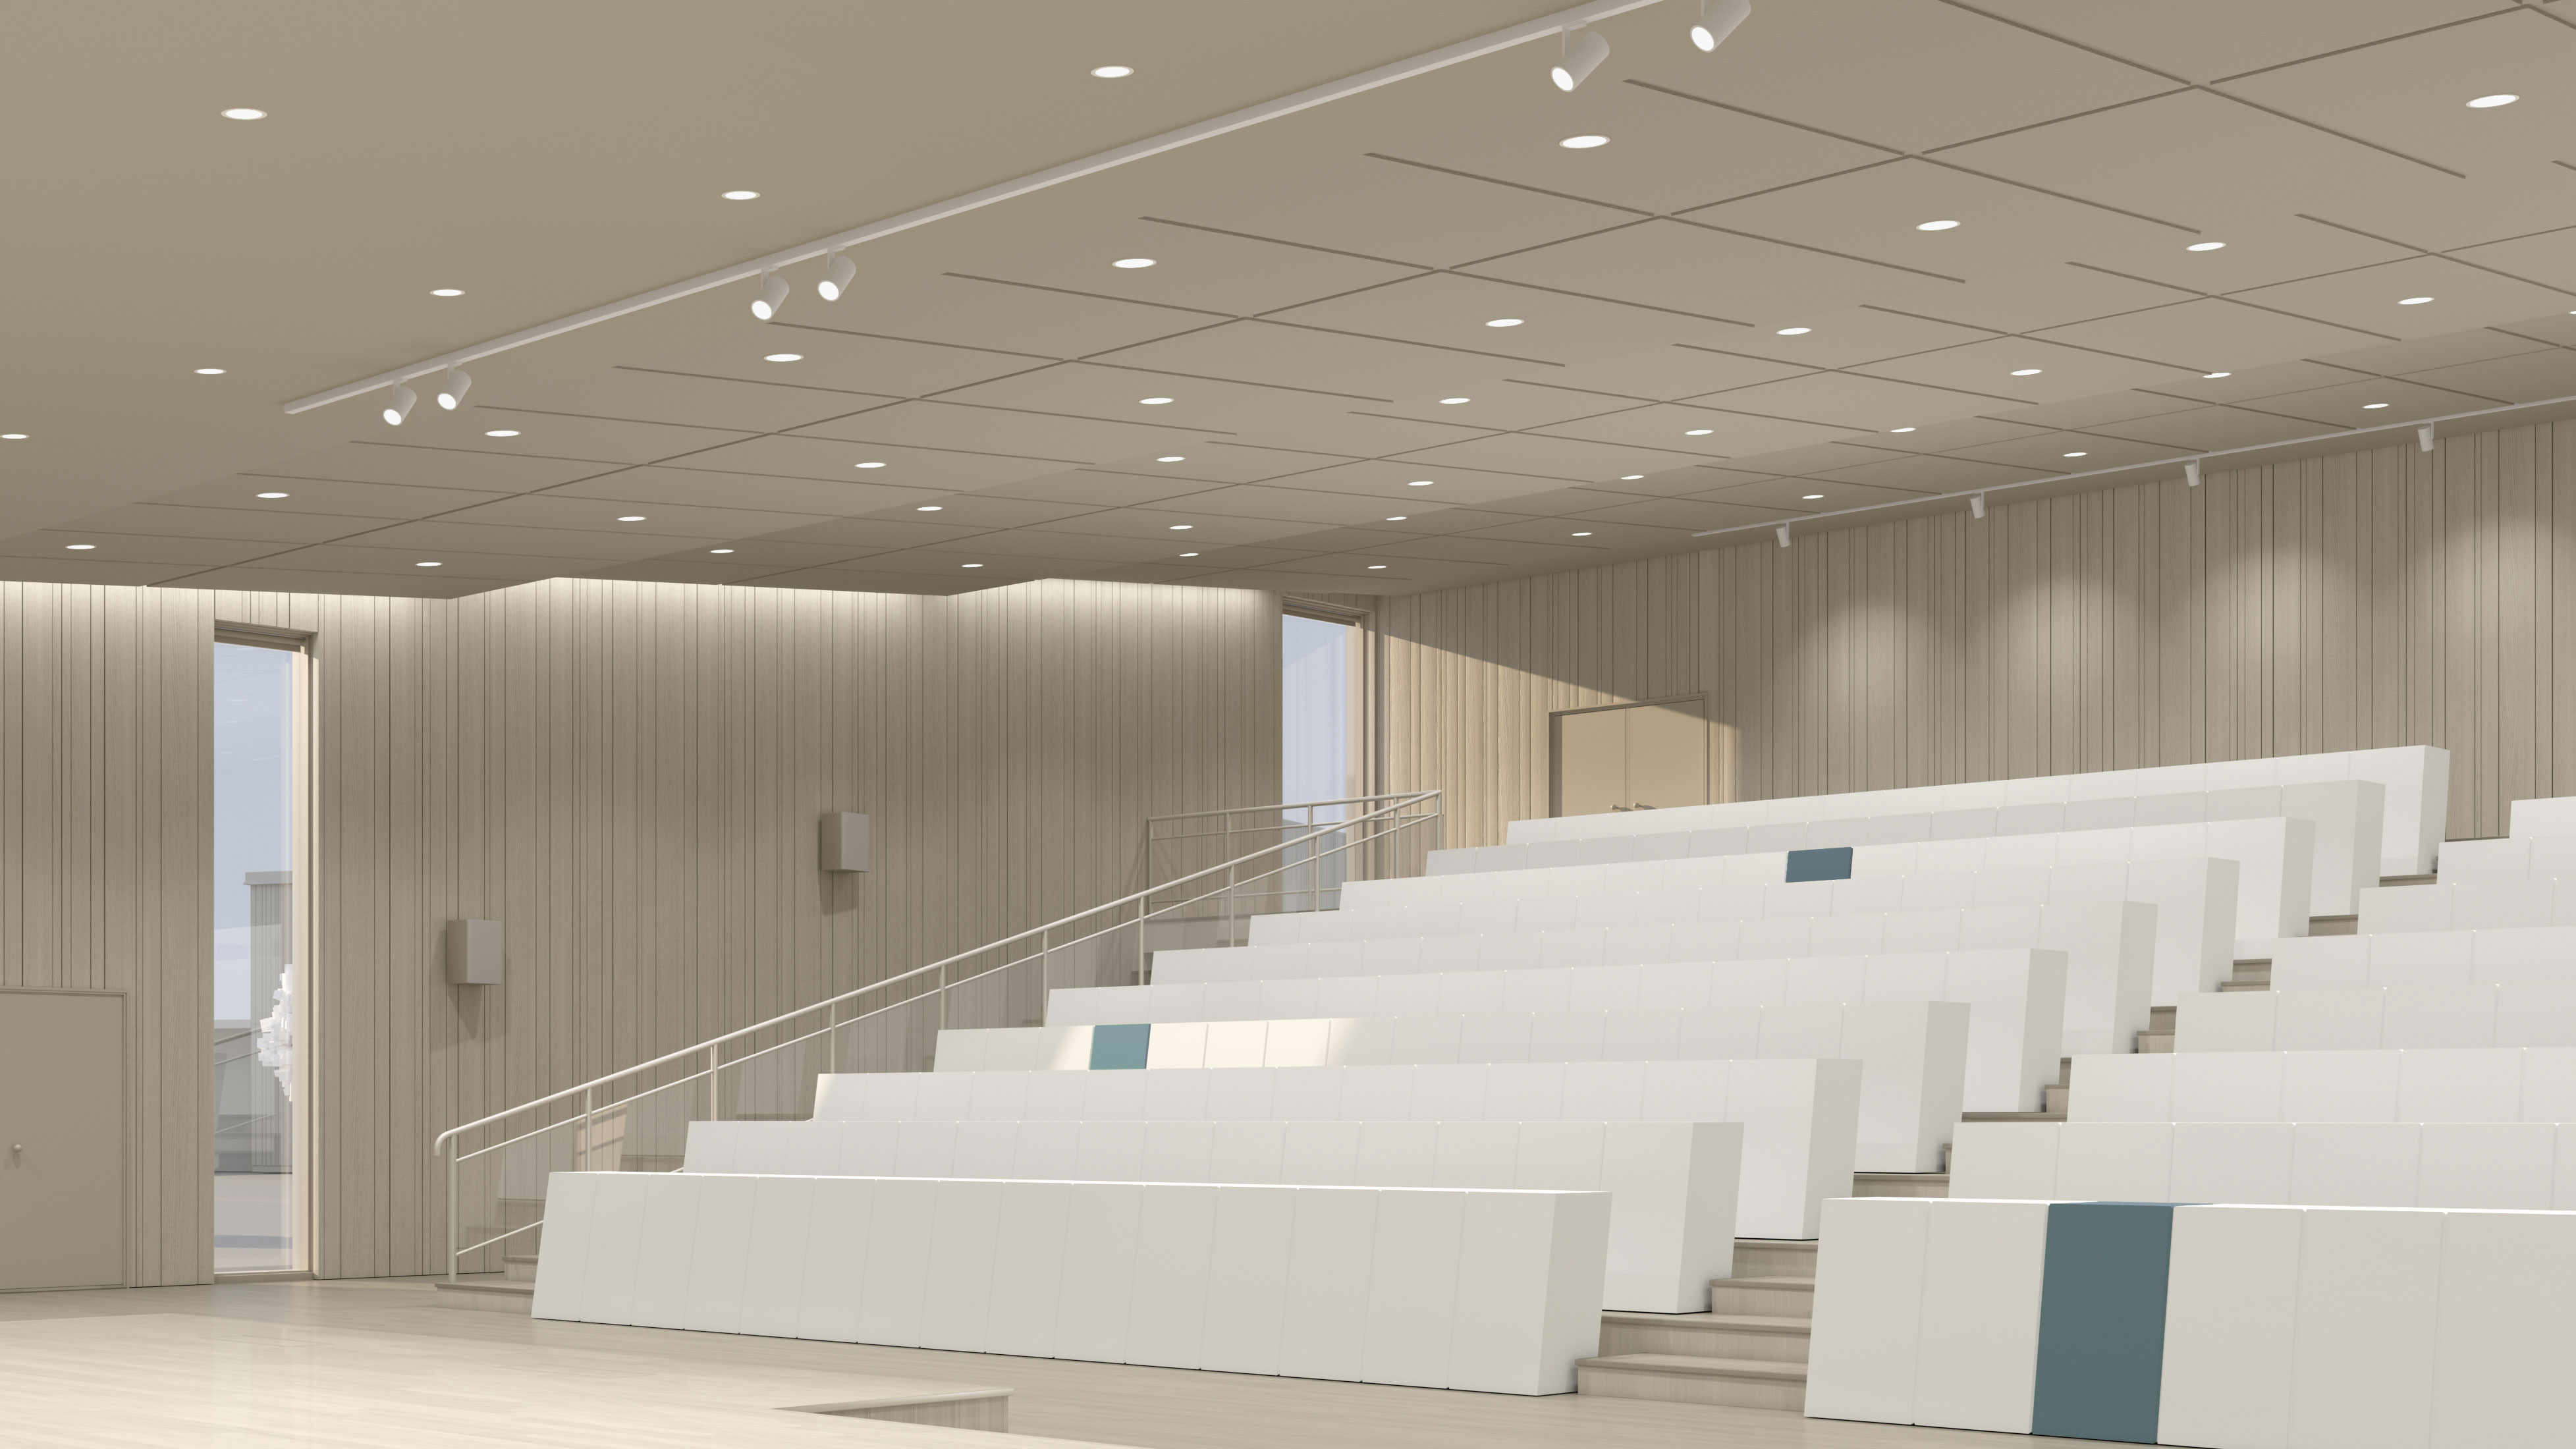 Auditoriums and lecture halls